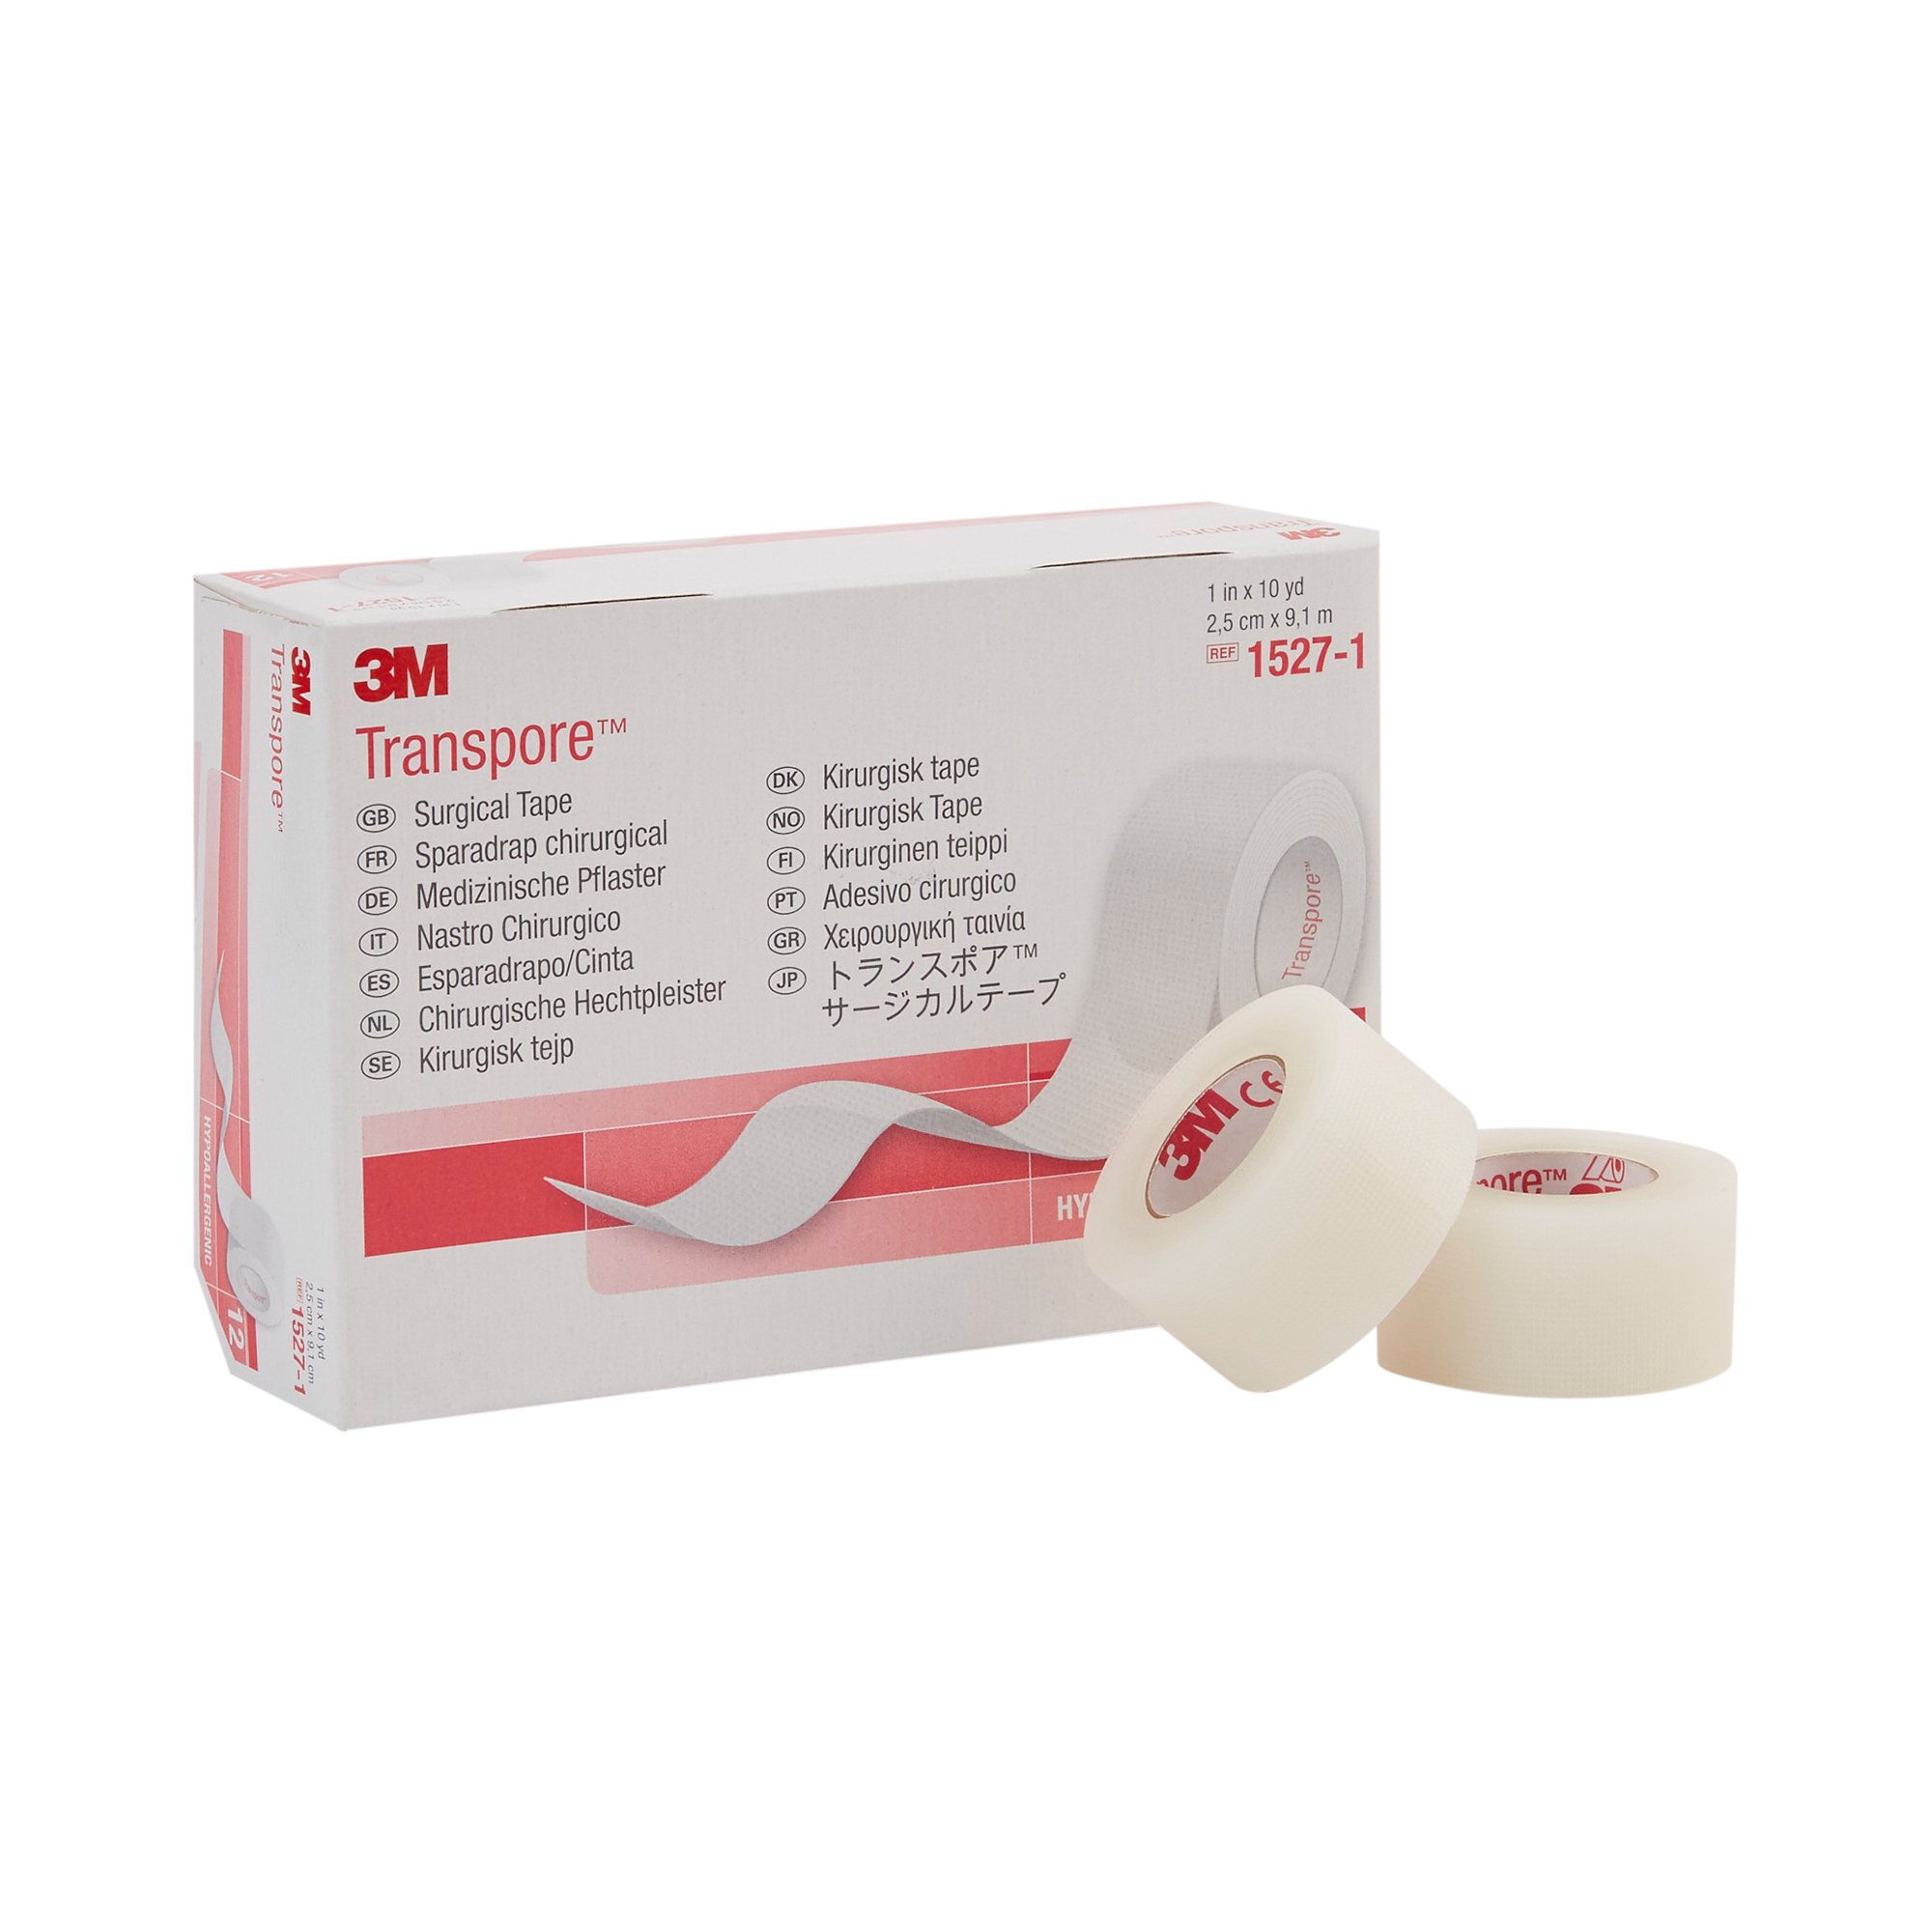 Buy 3M Blenderm Clear Waterproof Surgical Tape [FSA Approved]